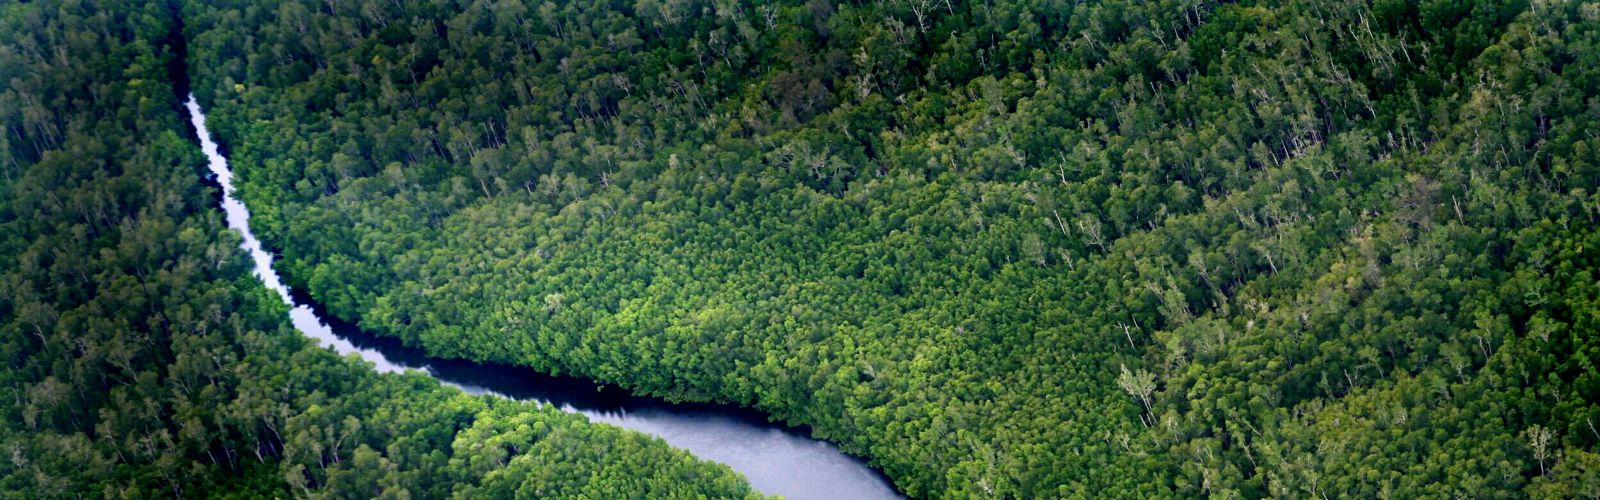 Sungai Wain Forest Reserve in East Kalimantan on the island of Borneo, Indonesia.